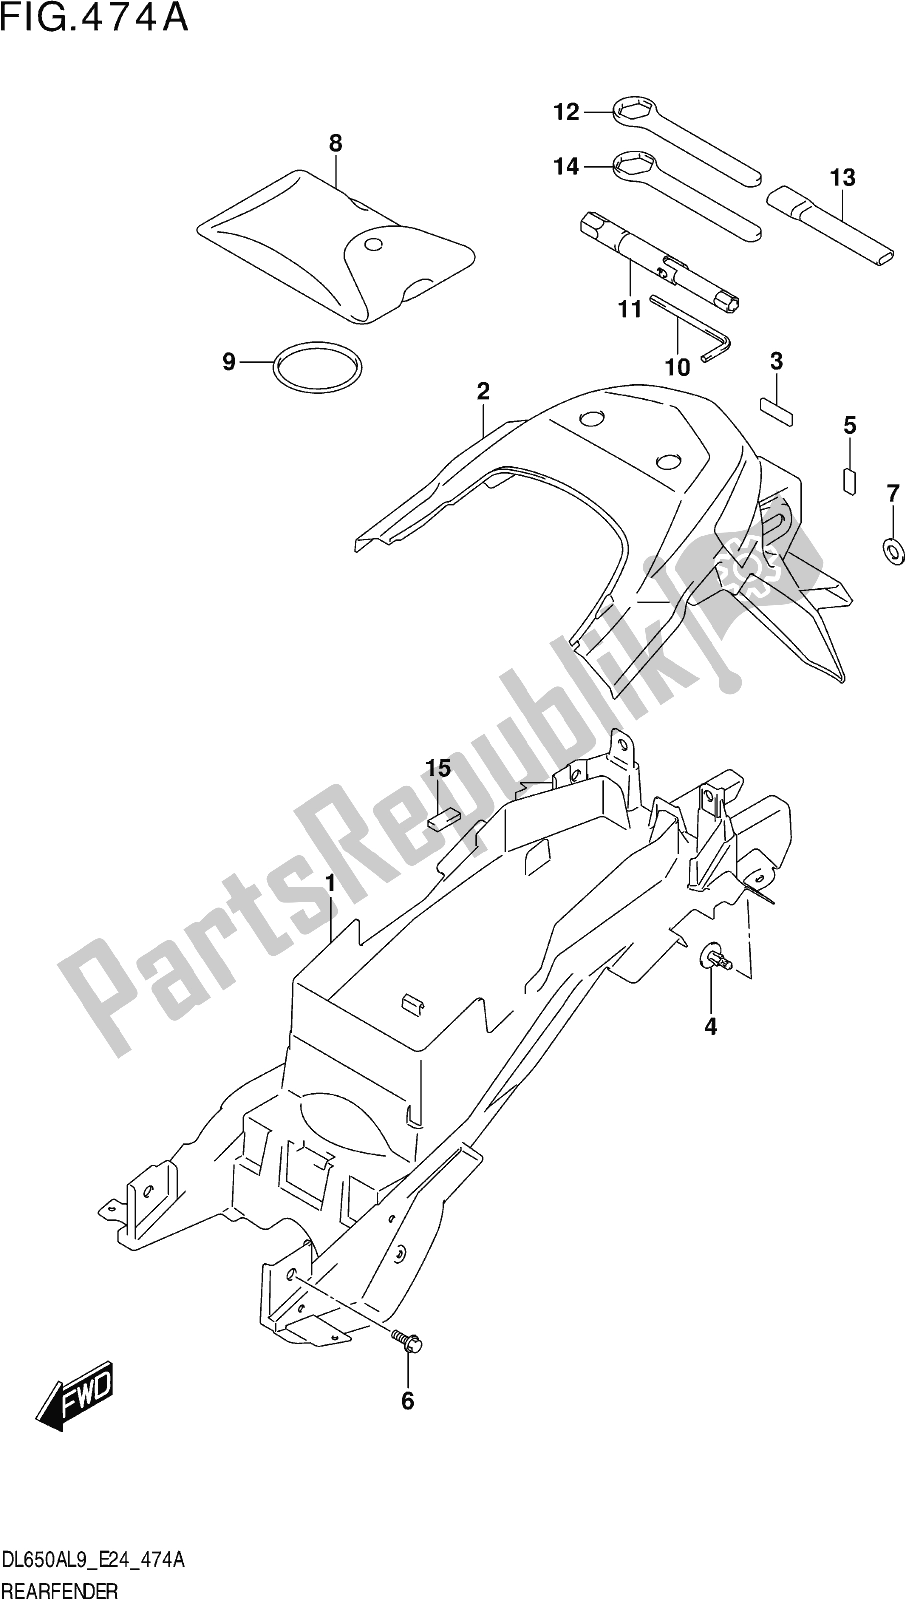 All parts for the Fig. 474a Rear Fender of the Suzuki DL 650A V Strom 2019